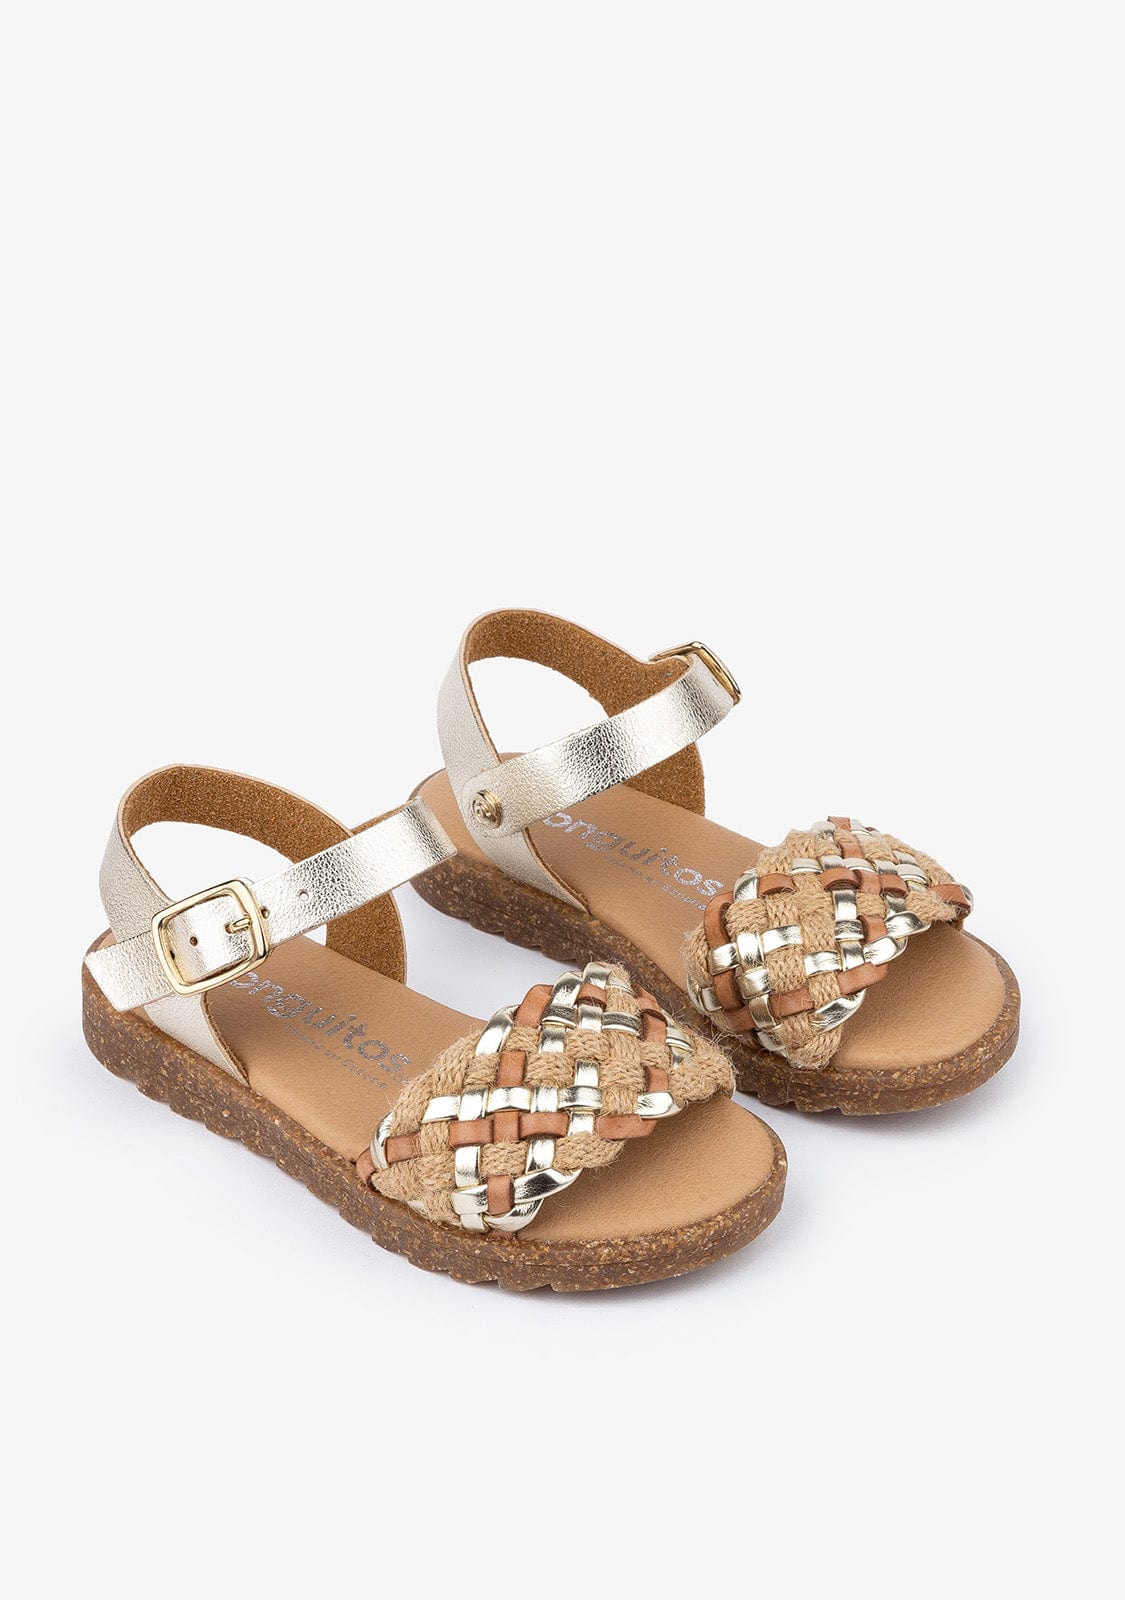 CONGUITOS Shoes Girl's Platinum Braided Sandals Leather